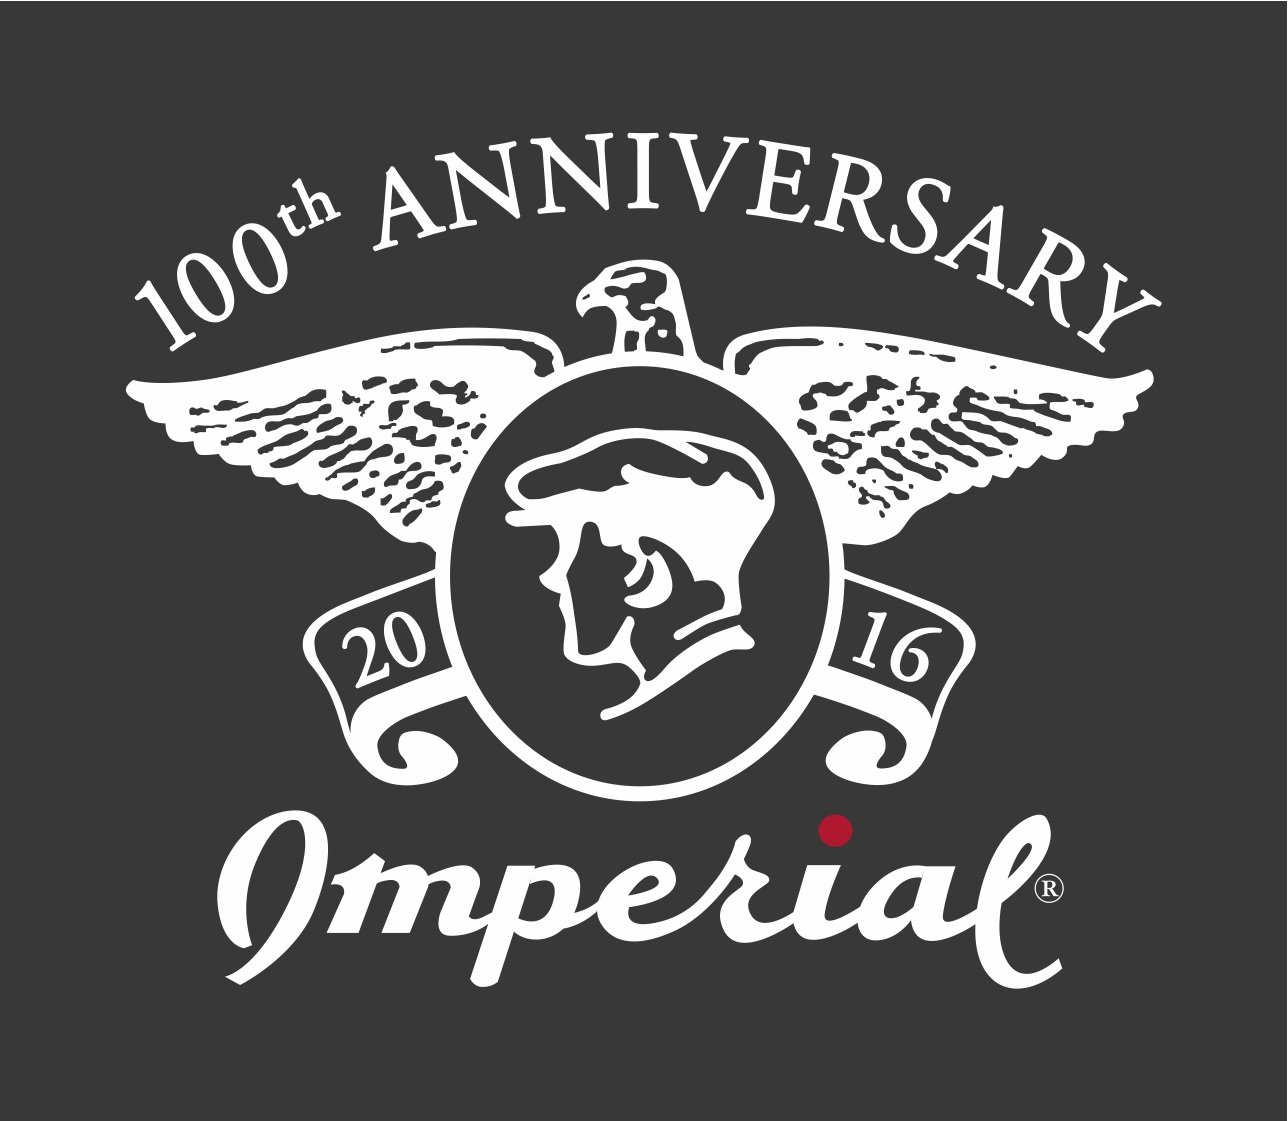 Imperial 100th anniversary logo, primary, black field with white graphic